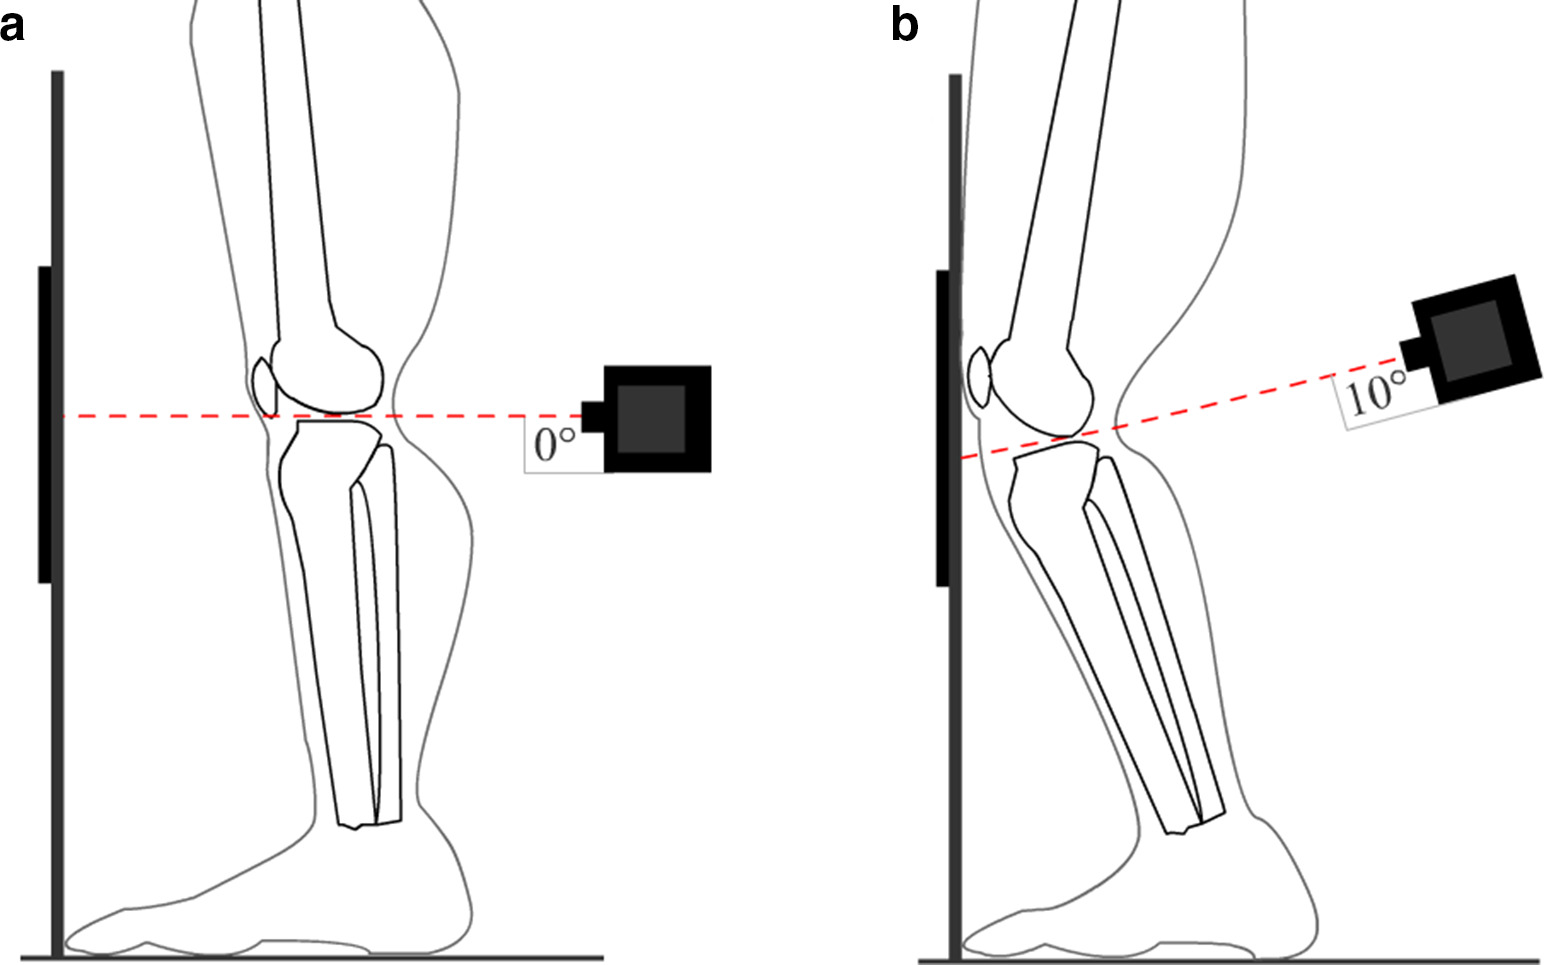 Fig. 3 
            Posteroanterior radiography with a) upright standing position with the great toes touching the anterior wall of the frame and both feet in 10° external rotation, and b) both knees and thighs pressed against the anterior wall of the frame in order to fix flexion of the knees, resulting in vertical alignment of the patella, toes, and chest. The x-ray beam is angled 10° caudal and centred at the level of the joint line until the anterior and posterior margins of the tibial plateau superimposed.
          